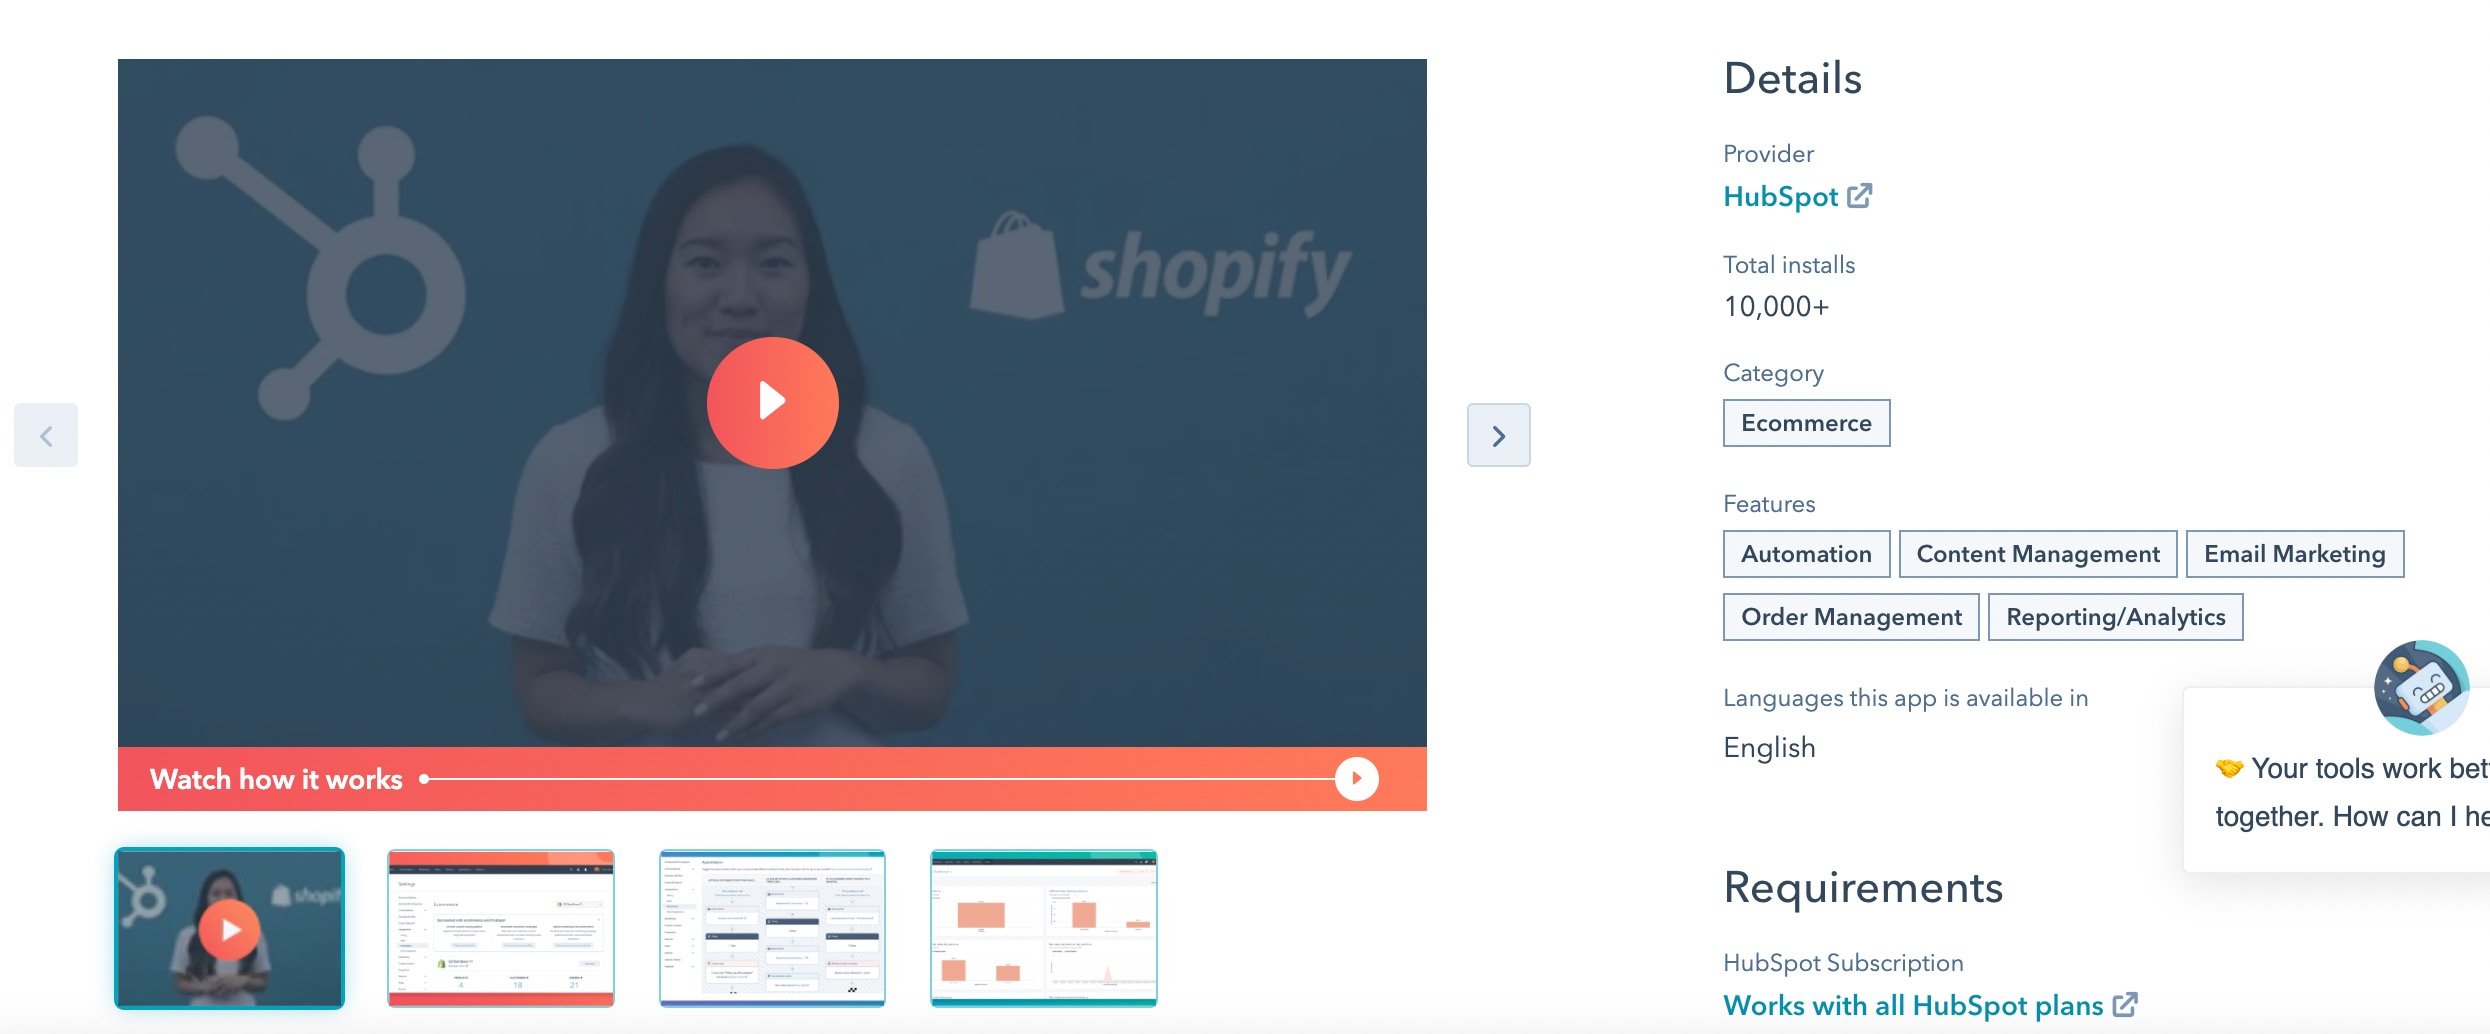 Shopify HubSpot Integration Connect Them Today 2022-04-01 at 4.49.38 PM